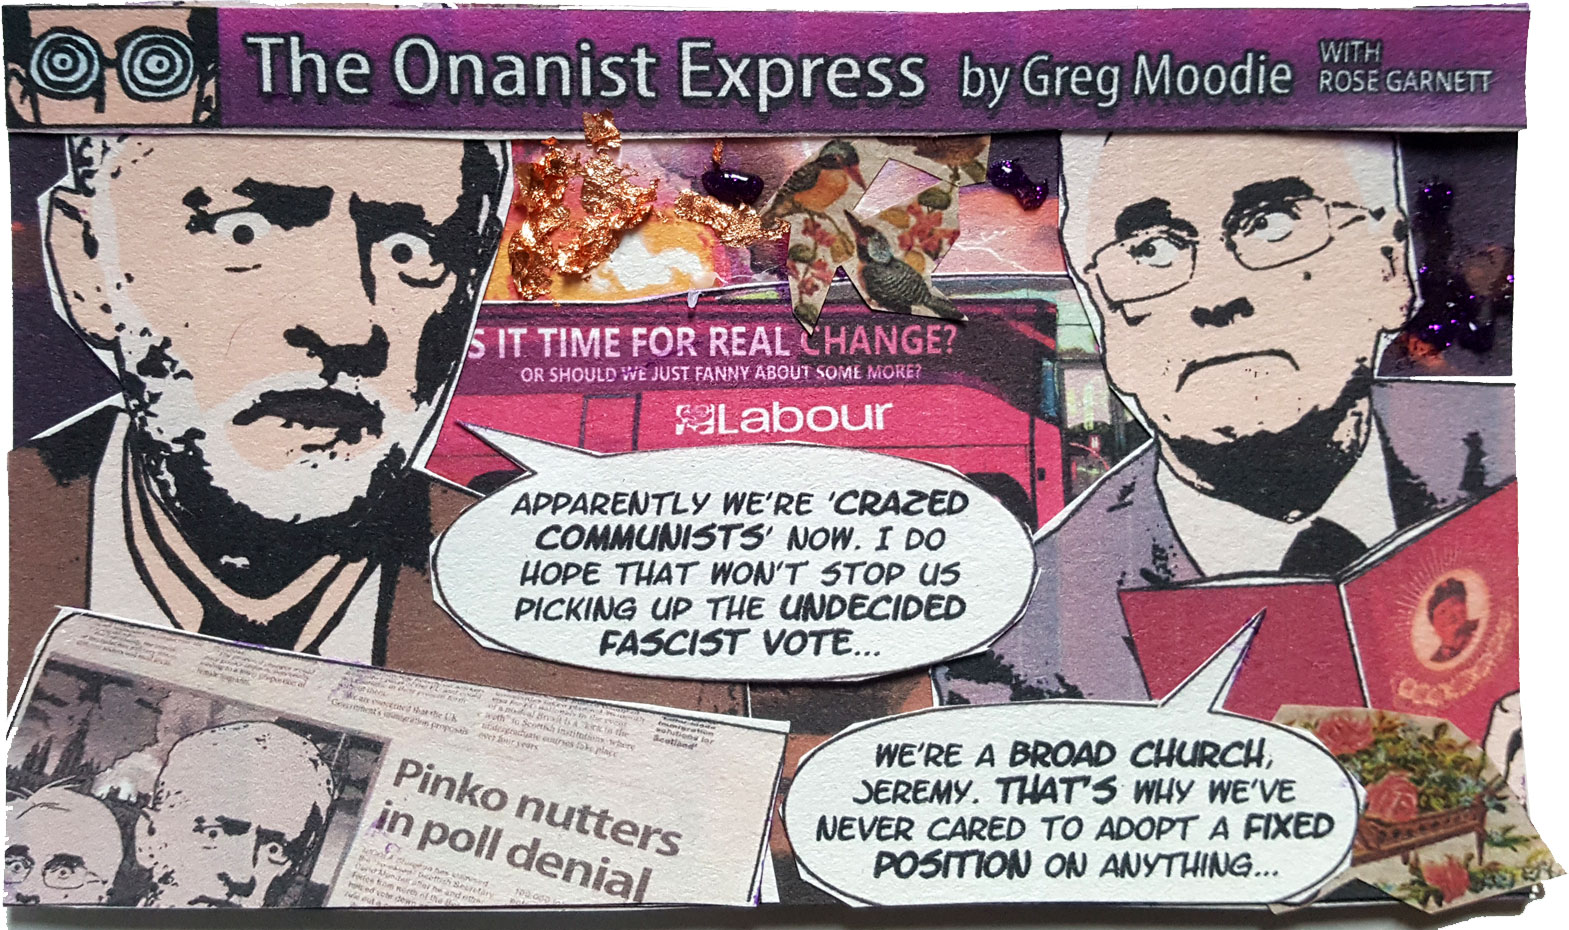 The Onanist Express